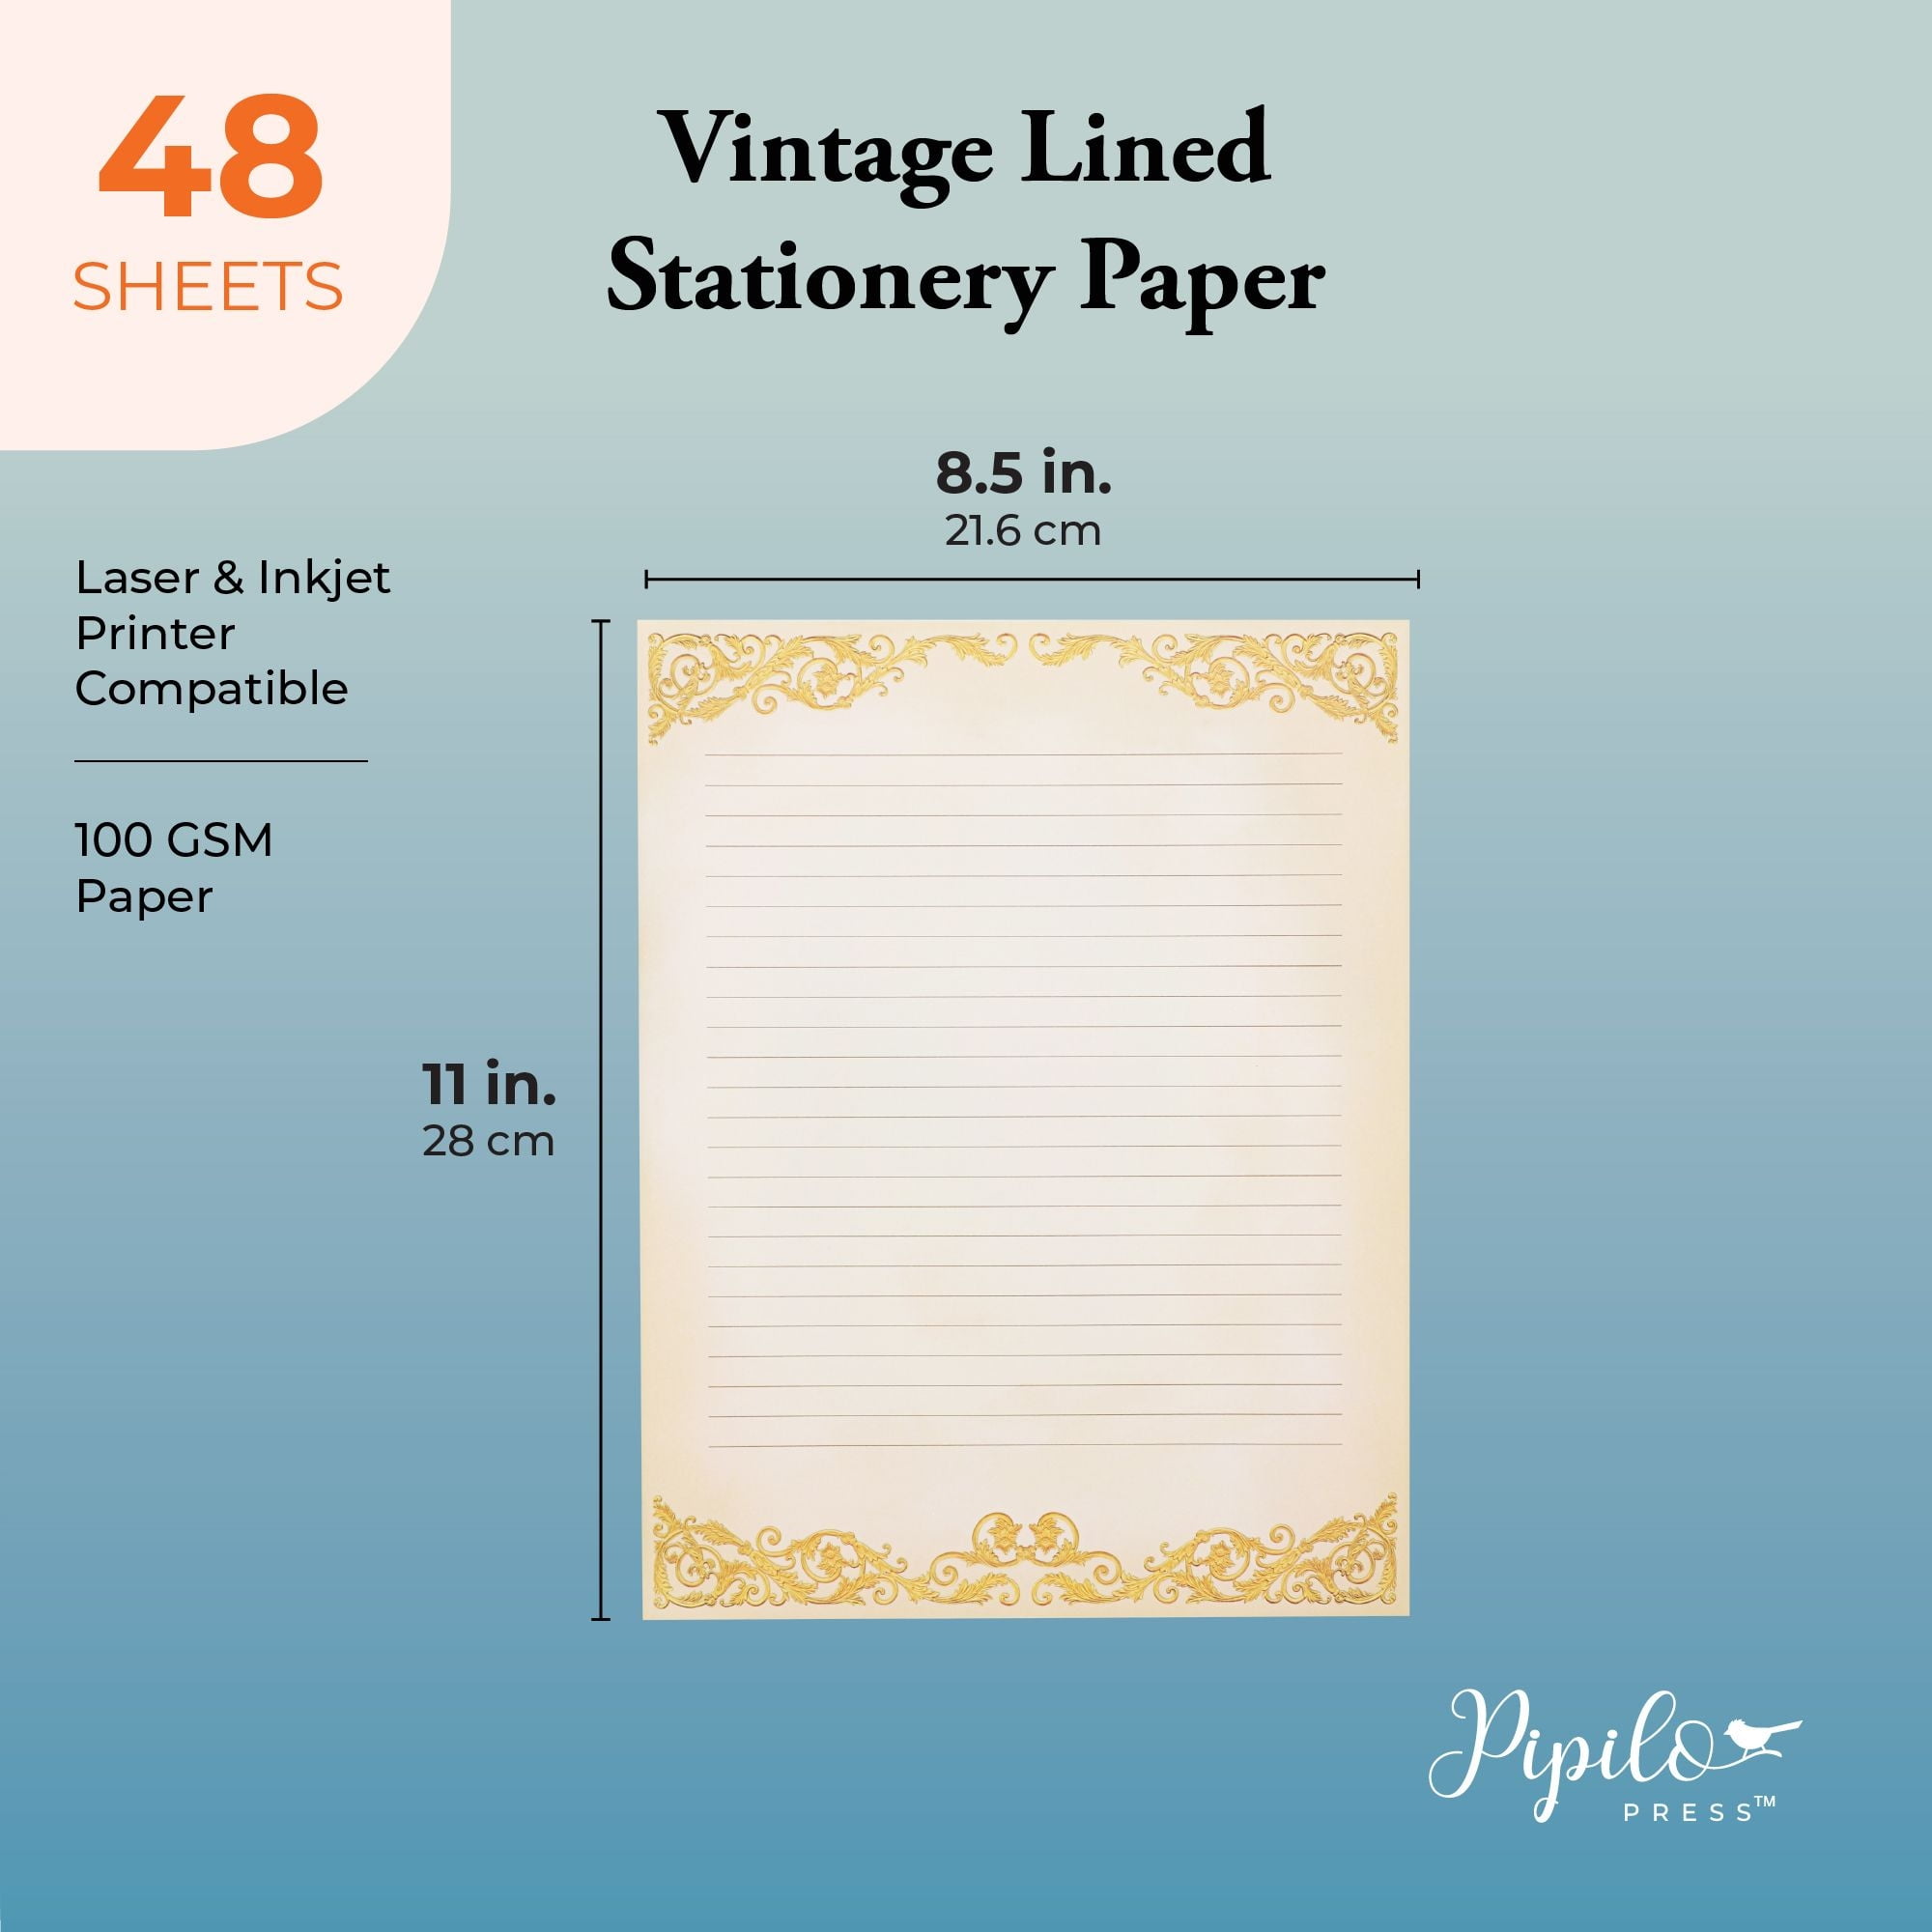 Paper Master Vintage Stationary Set, Old Fashion Letter Writing Stationary Paper and Envelopes Set, 48 Sheets Feather Stationery Set with 24